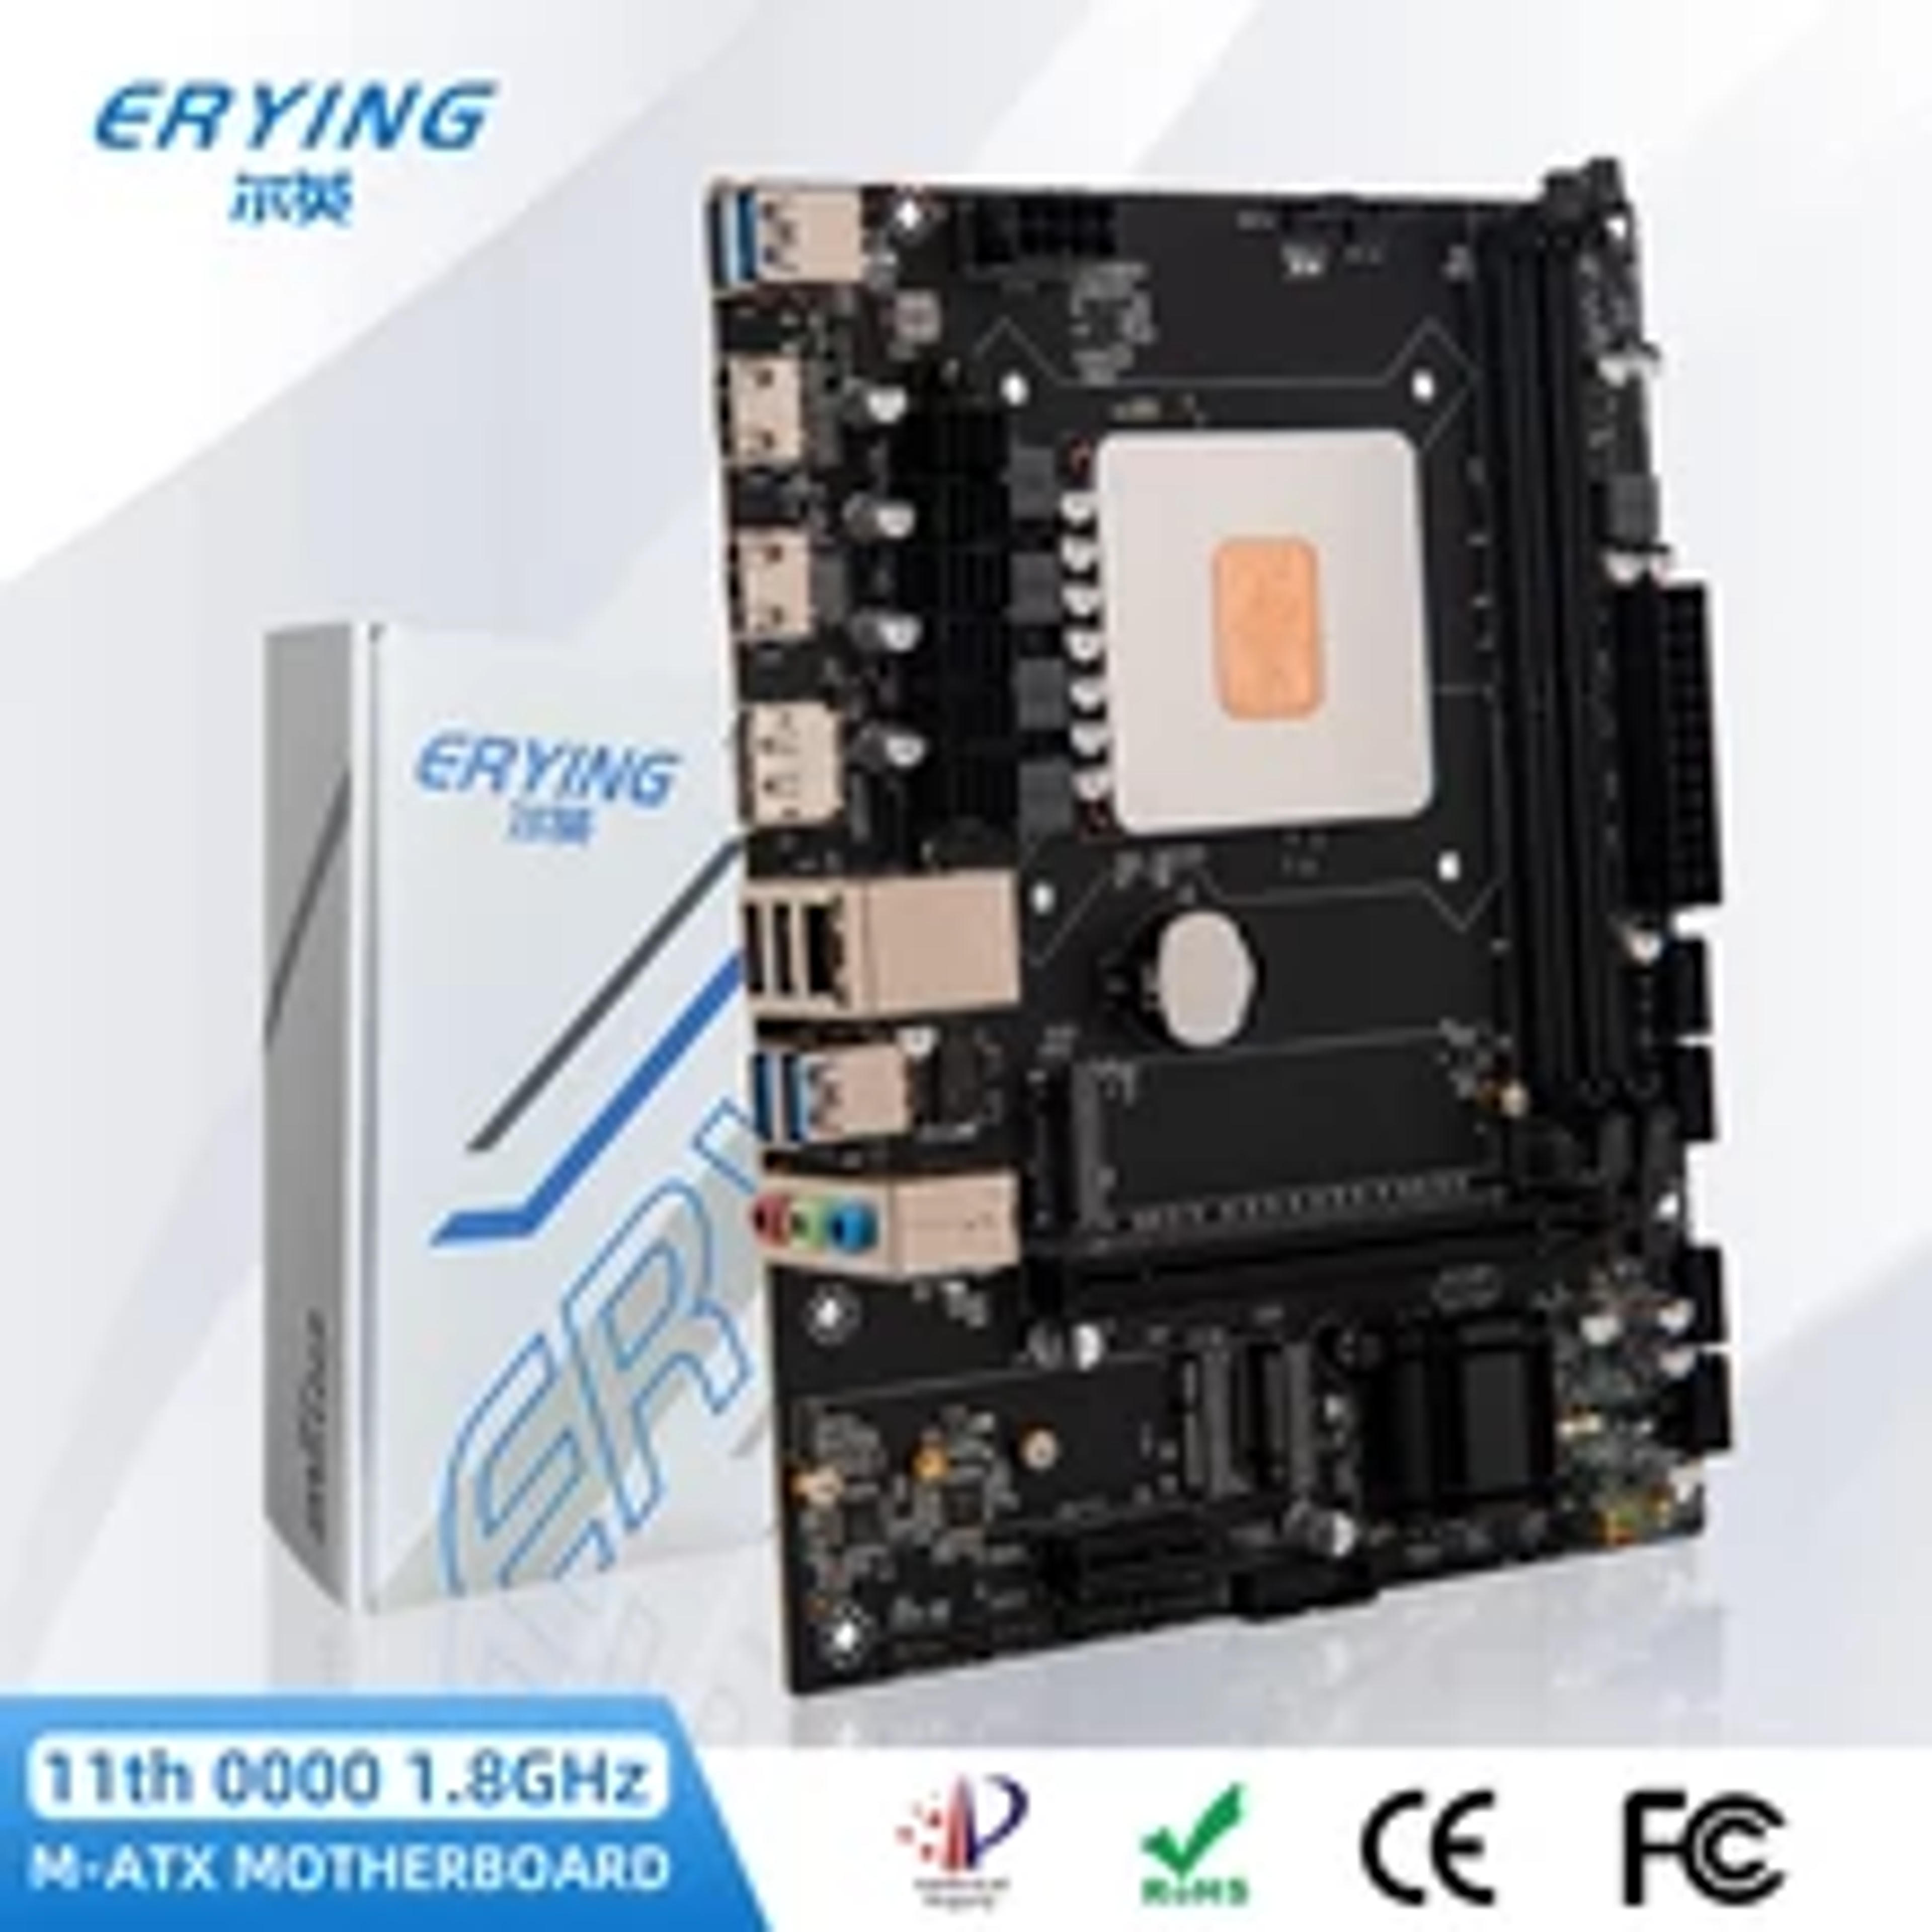 Erying I9 Kit Gaming Pc Motherboard With Embed Cpu 11th Core 2.6ghz(refer To I9 11900h) +ram 16gb 3200mhz + 512gb Ssd Nvme M.2 - Integrated Circuits - AliExpress